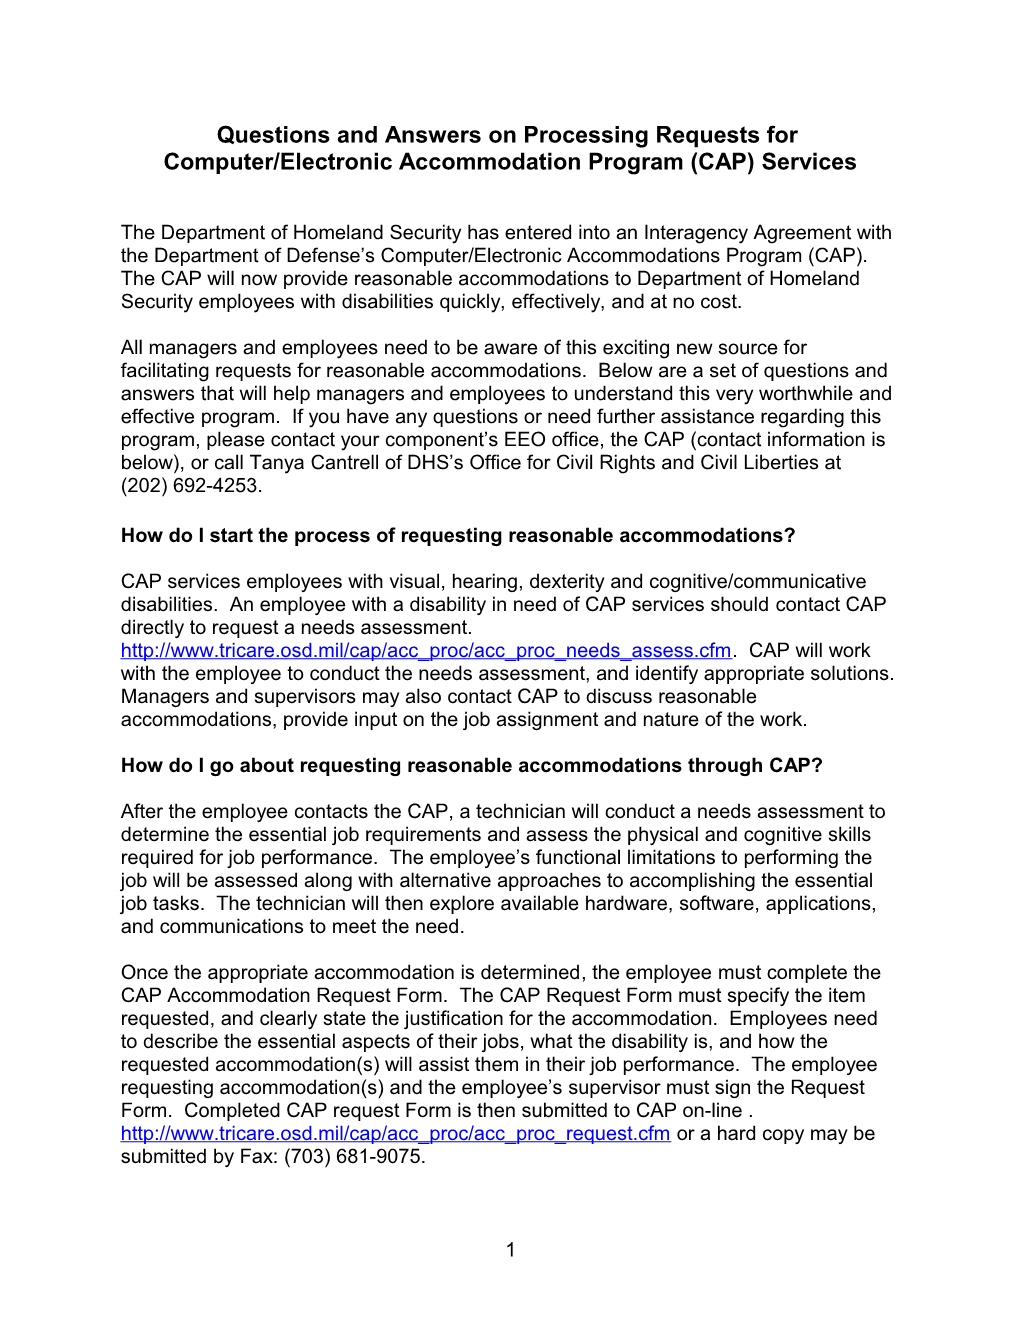 Summary of Procedures for Requesting Reasonable Accommodation from CAP